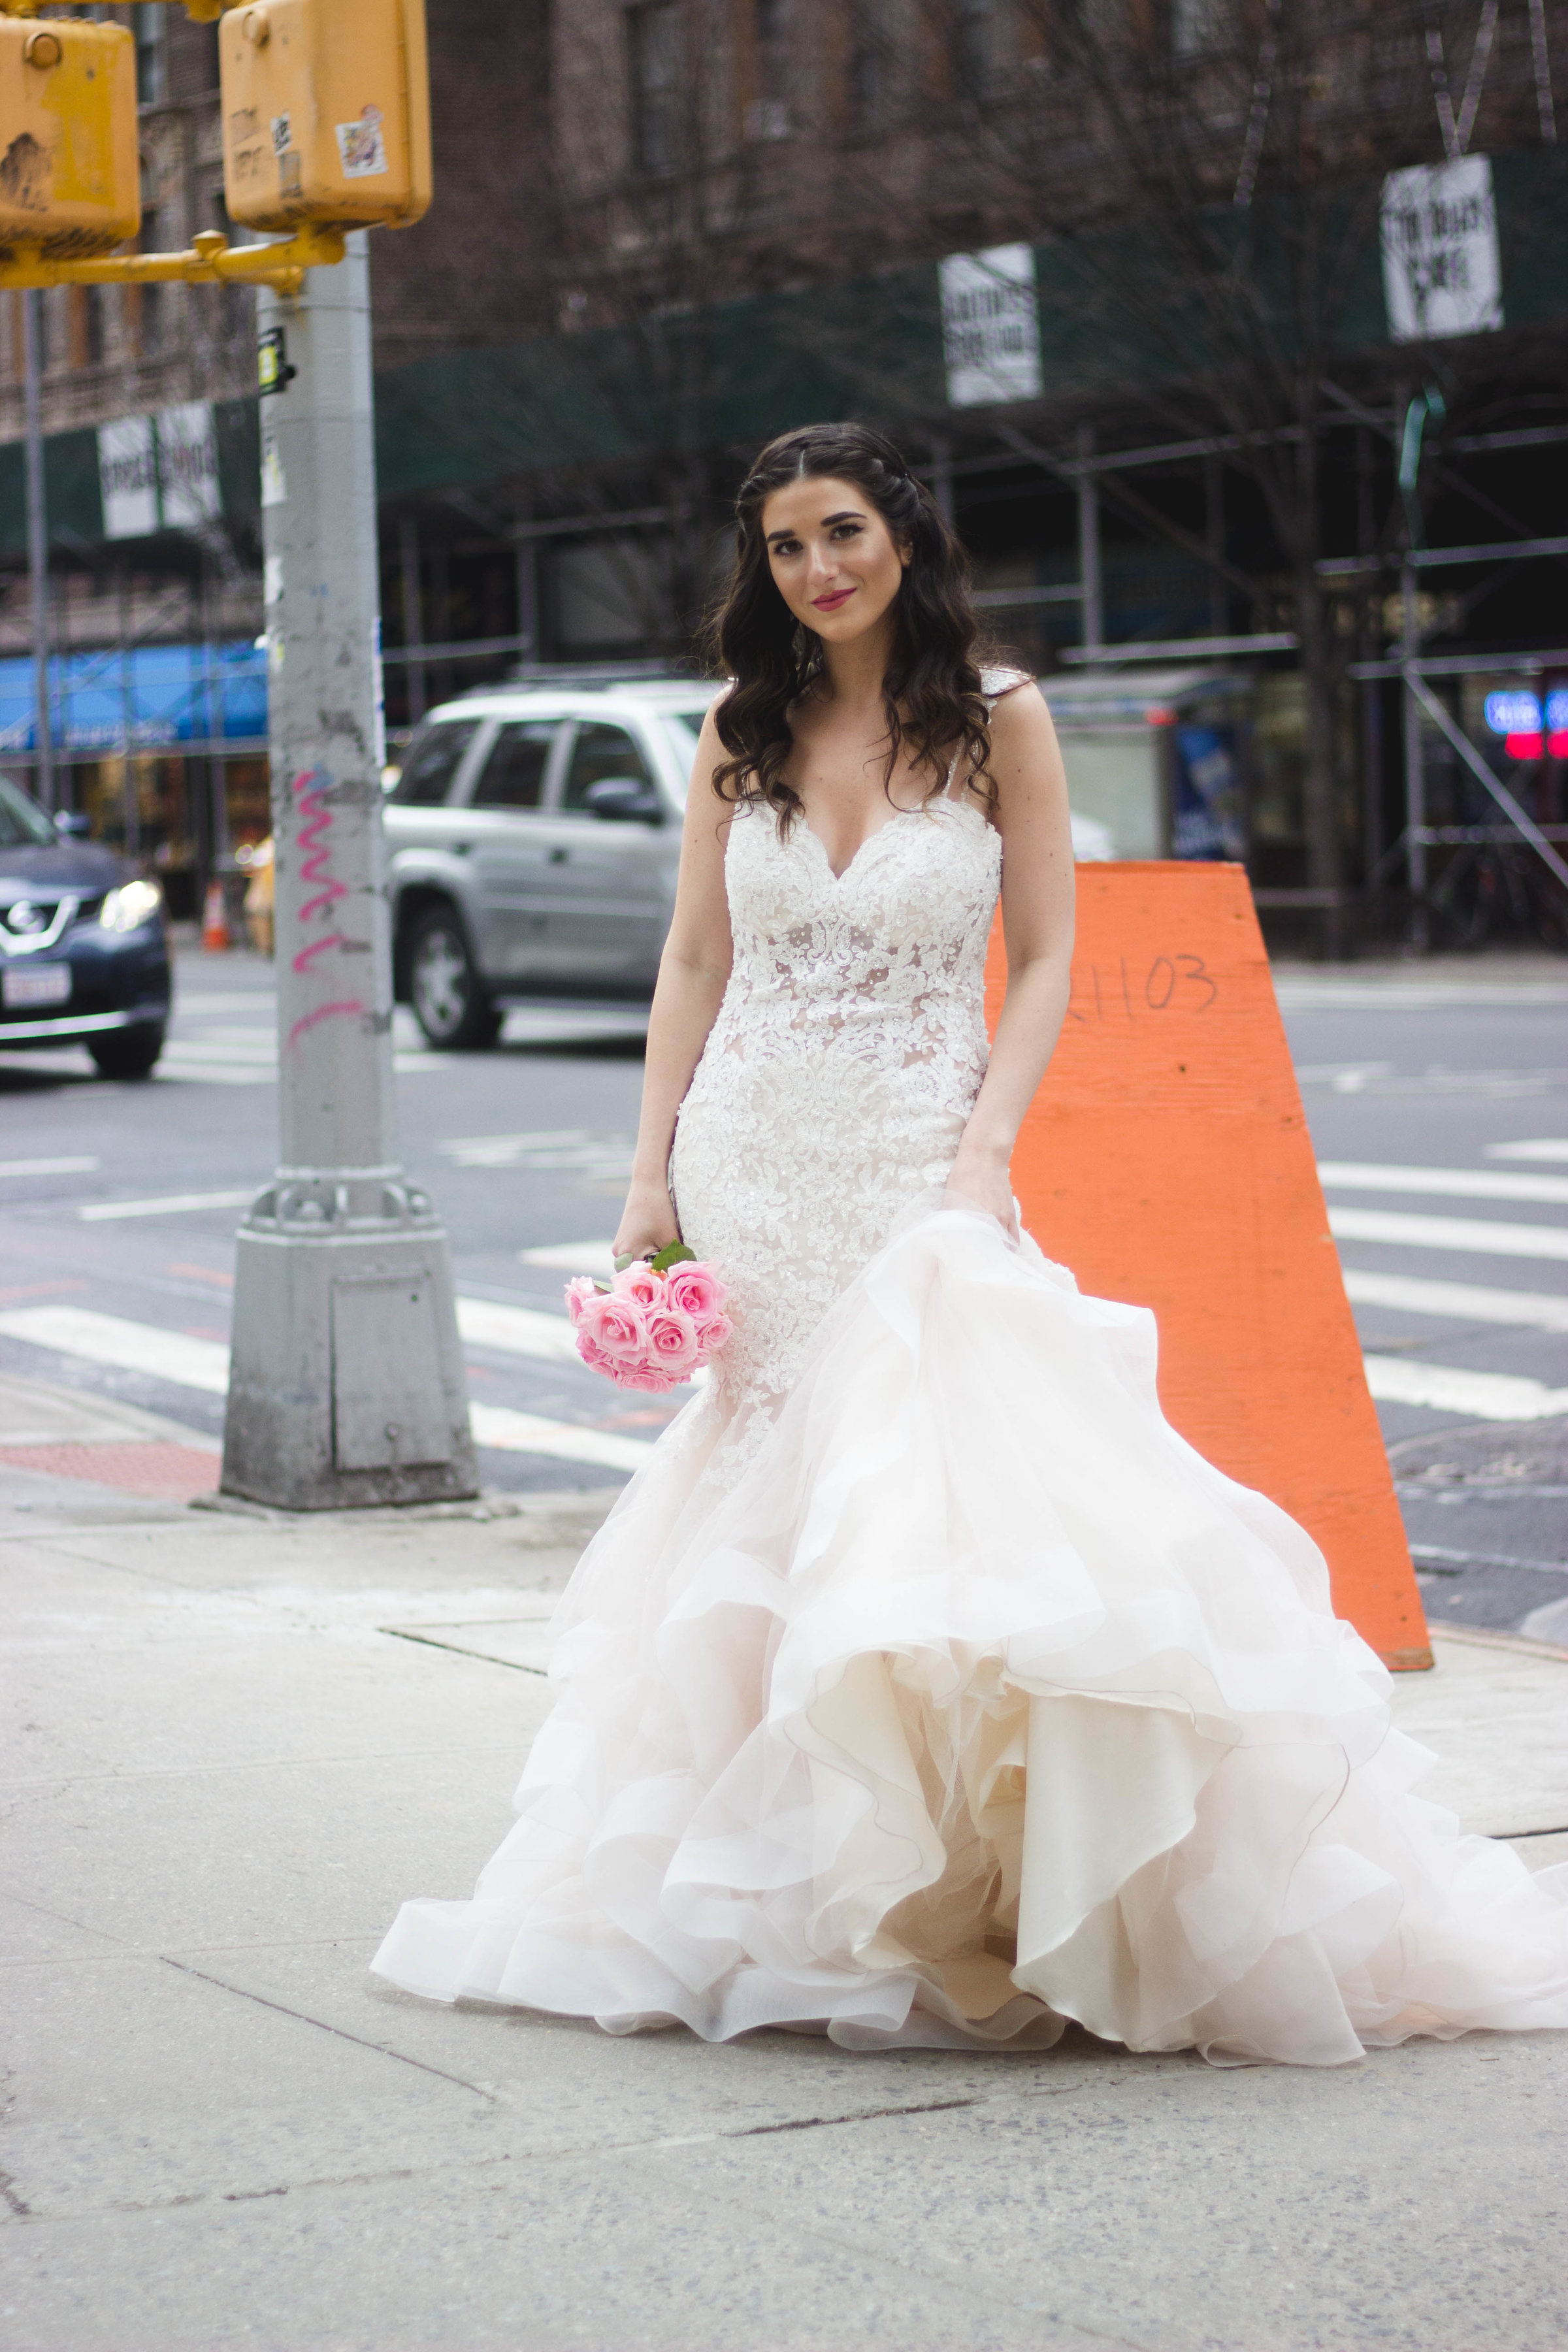 Playing Dress Up With Morilee Bridal Esther Santer Fashion Blog NYC Street Style Blogger Outfit OOTD Trendy Wedding Dress Gown White Dreamy Modern Timeless Beautiful Train Pink Flowers Bouquet Hair Hairstyle  Beauty Makeup Lace Mermaid  Trumpet Flare.jpg